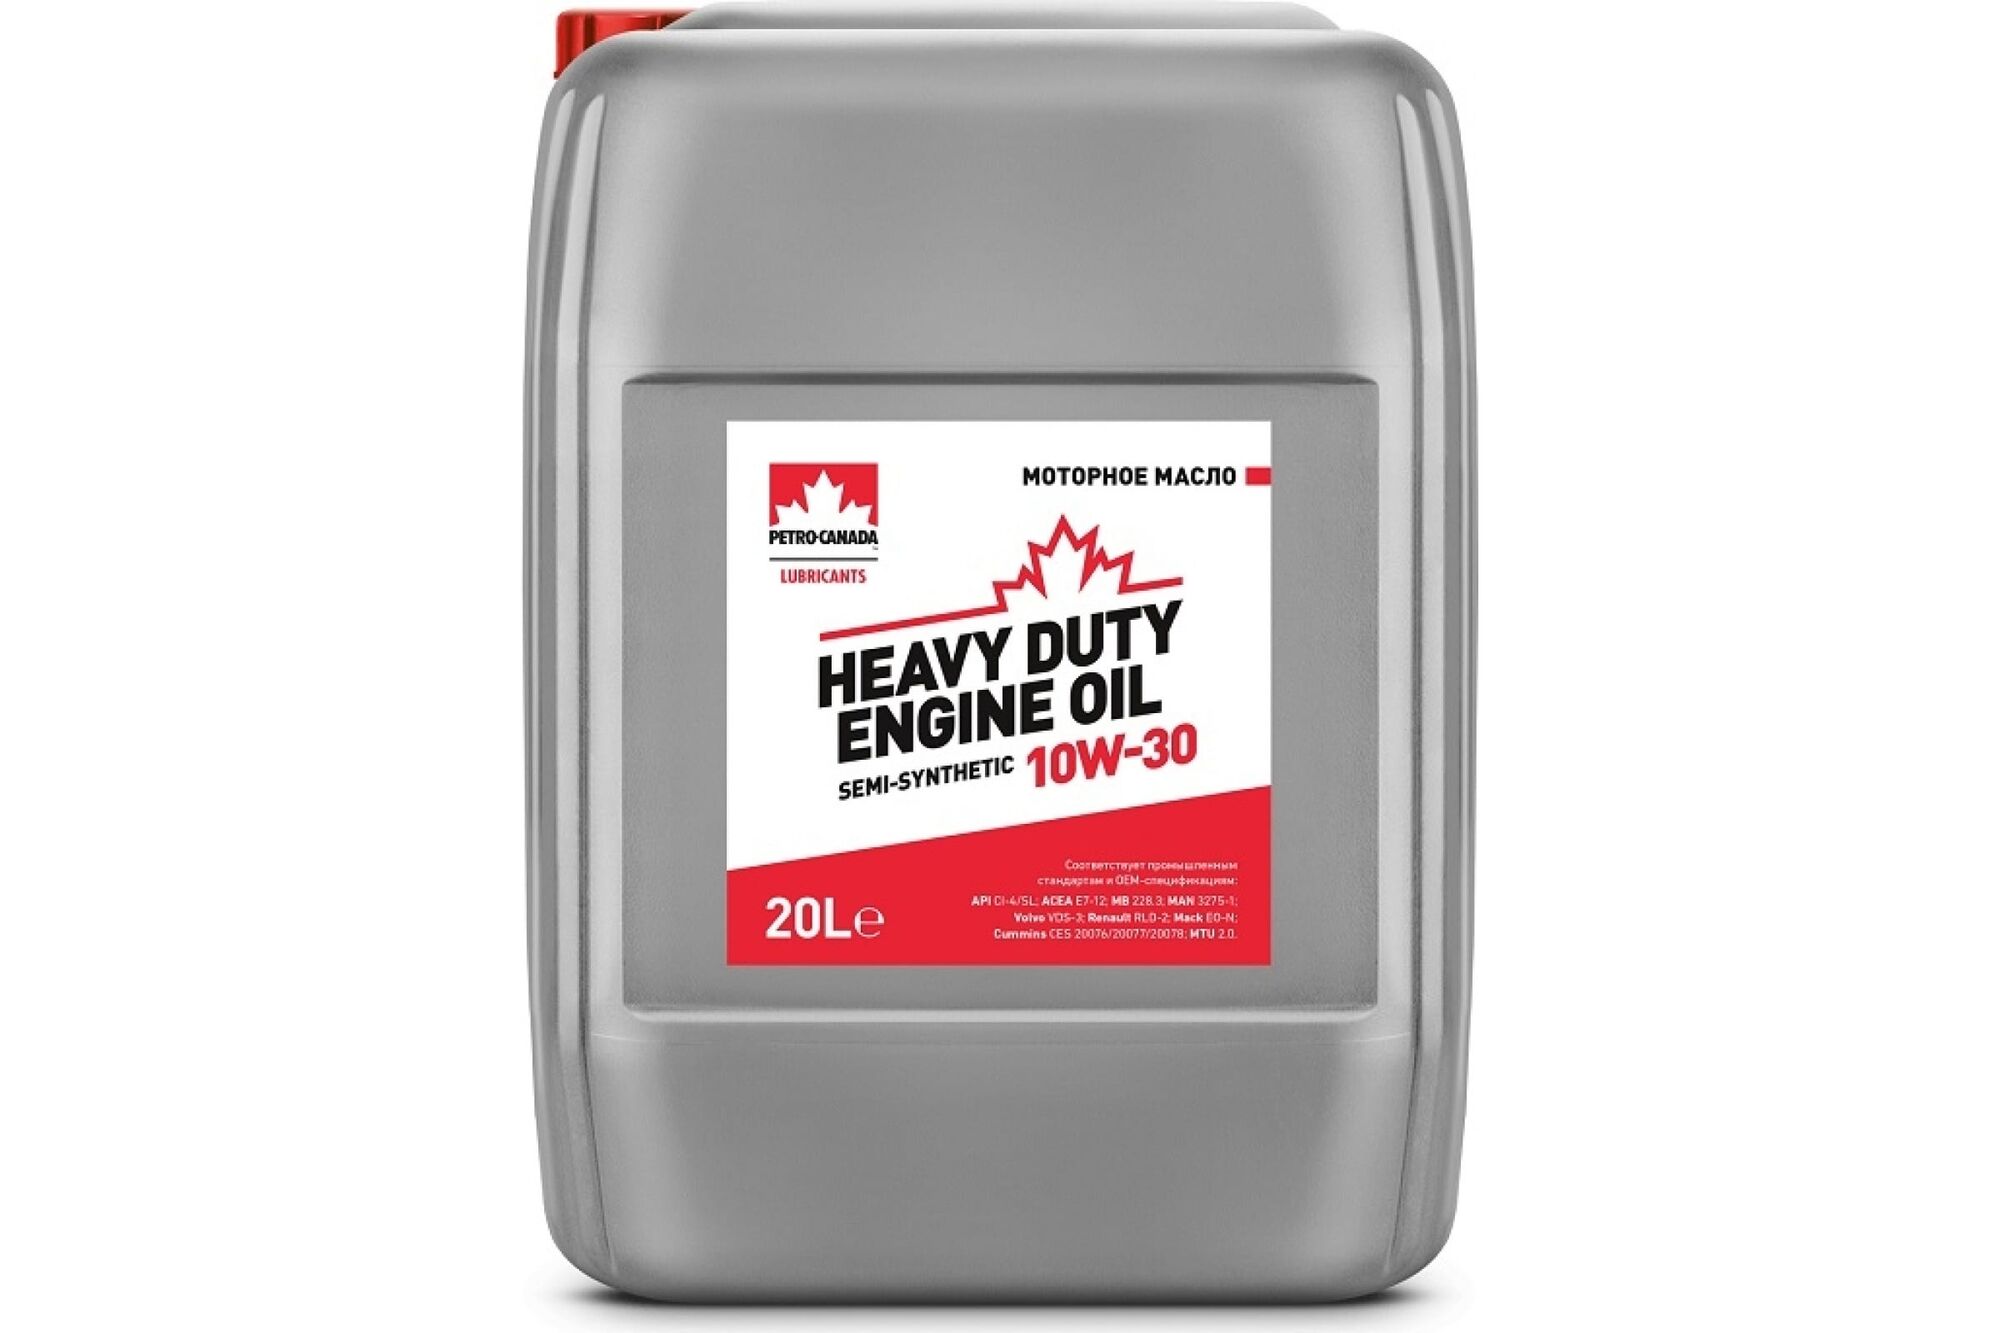 Моторное масло PETRO-CANADA Heavy Duty Engine Oil Semi-Synthetic 10W-30, 20 л PCHDEOSS13PL20 Petro-Canada